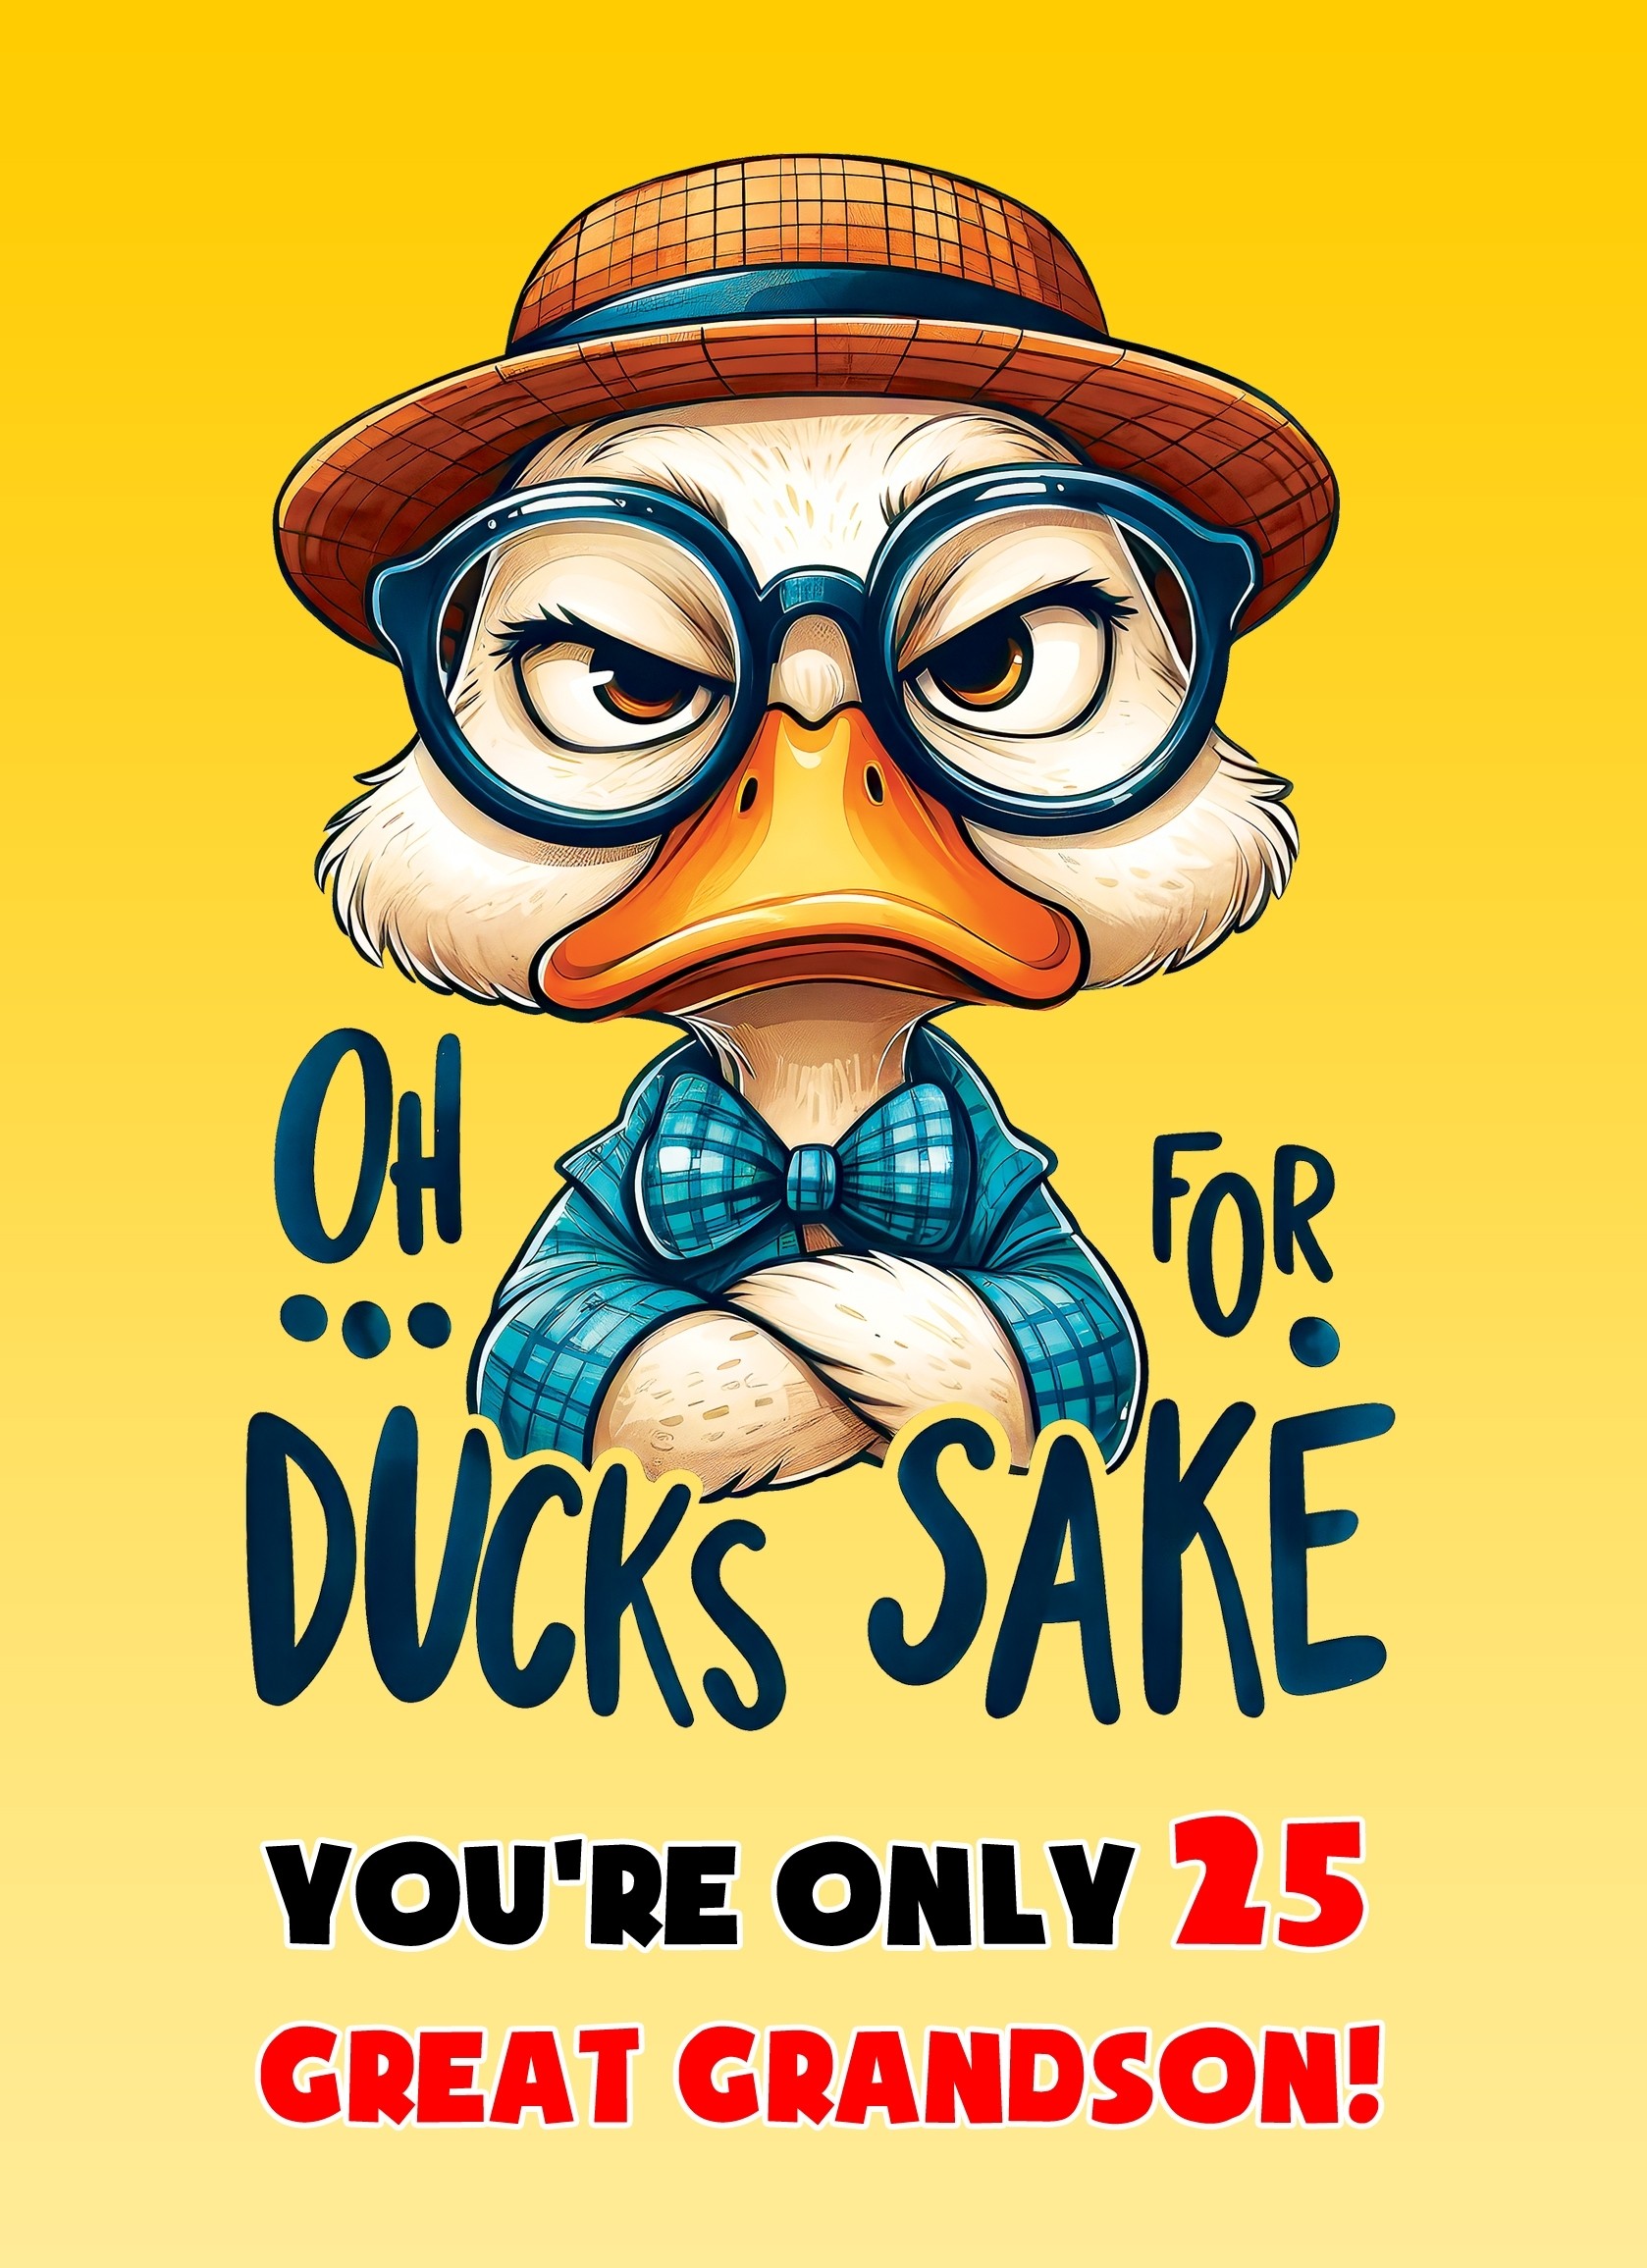 Great Grandson 25th Birthday Card (Funny Duck Humour)